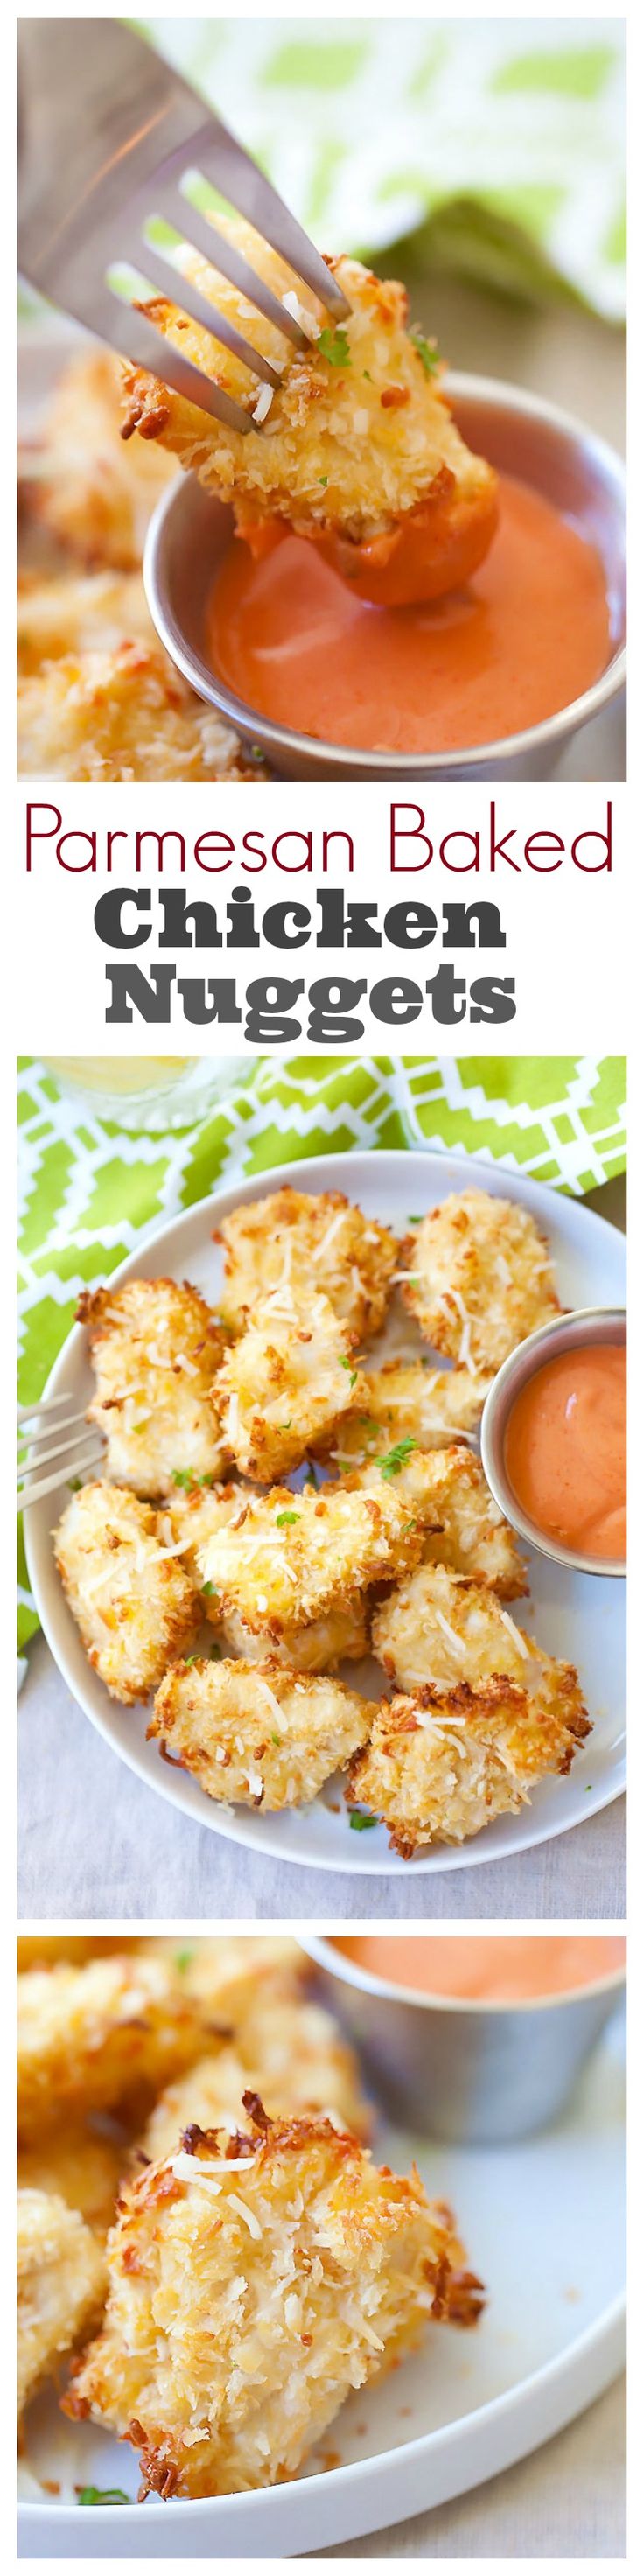 Parmesan Baked Chicken Nuggets - Best nuggets with real chicken & Parmesan, no deep-frying. The easiest baked chicken nuggets recipe ever | rasamalaysia.com